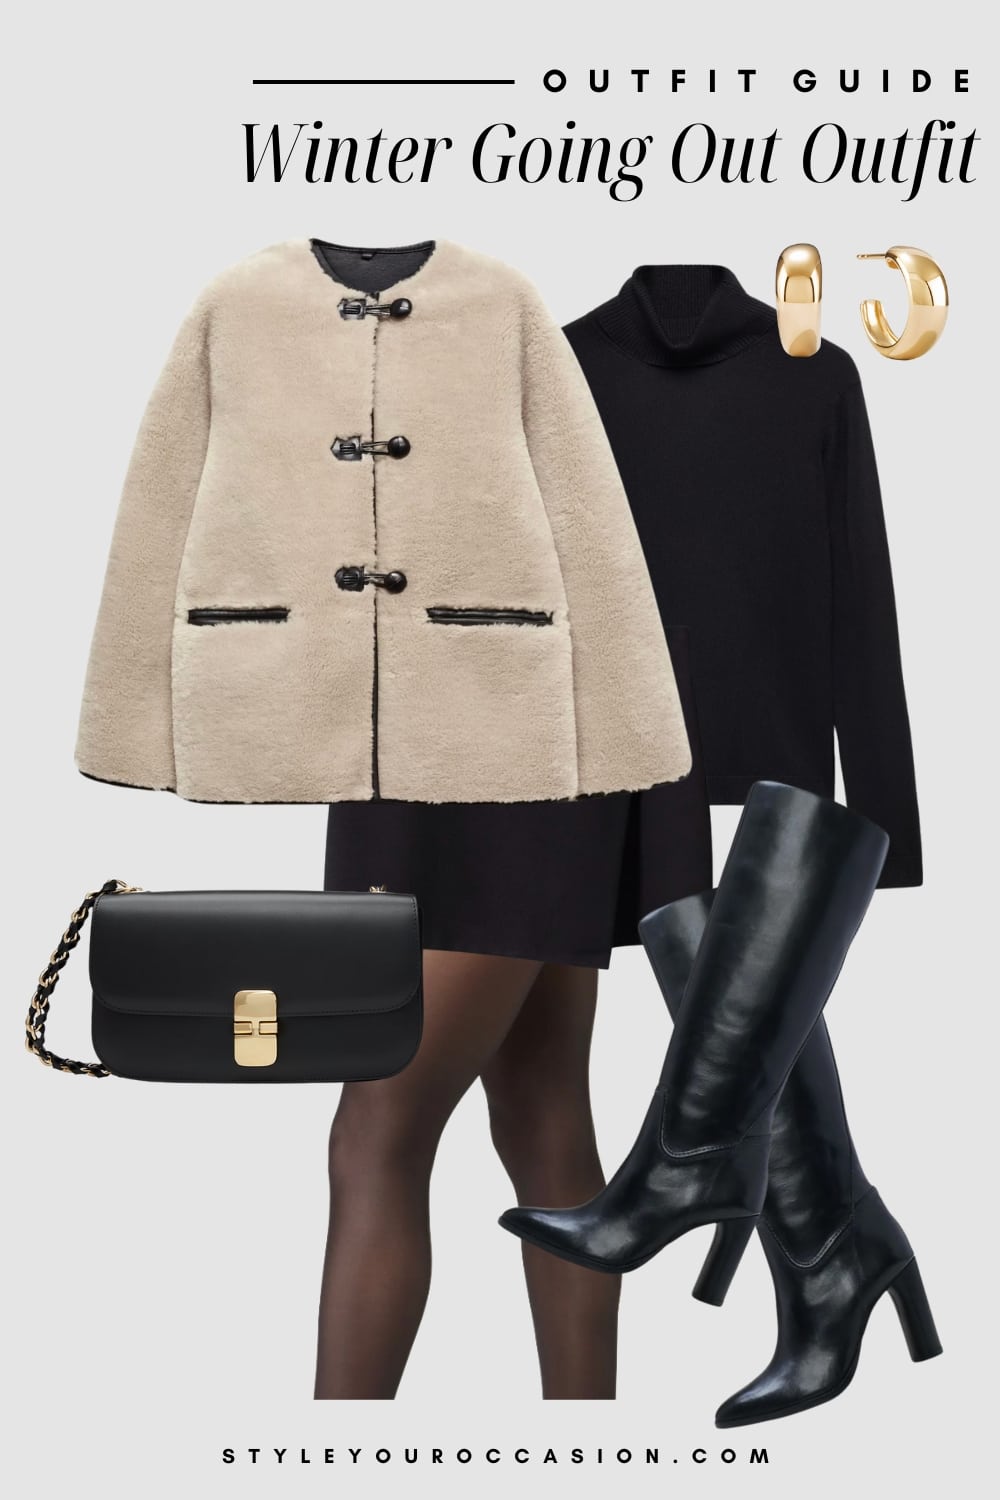 winter going out outfit graphic with a beige faux shearling coat, black top, black mini skirt, sheer tights, and knee-high boots